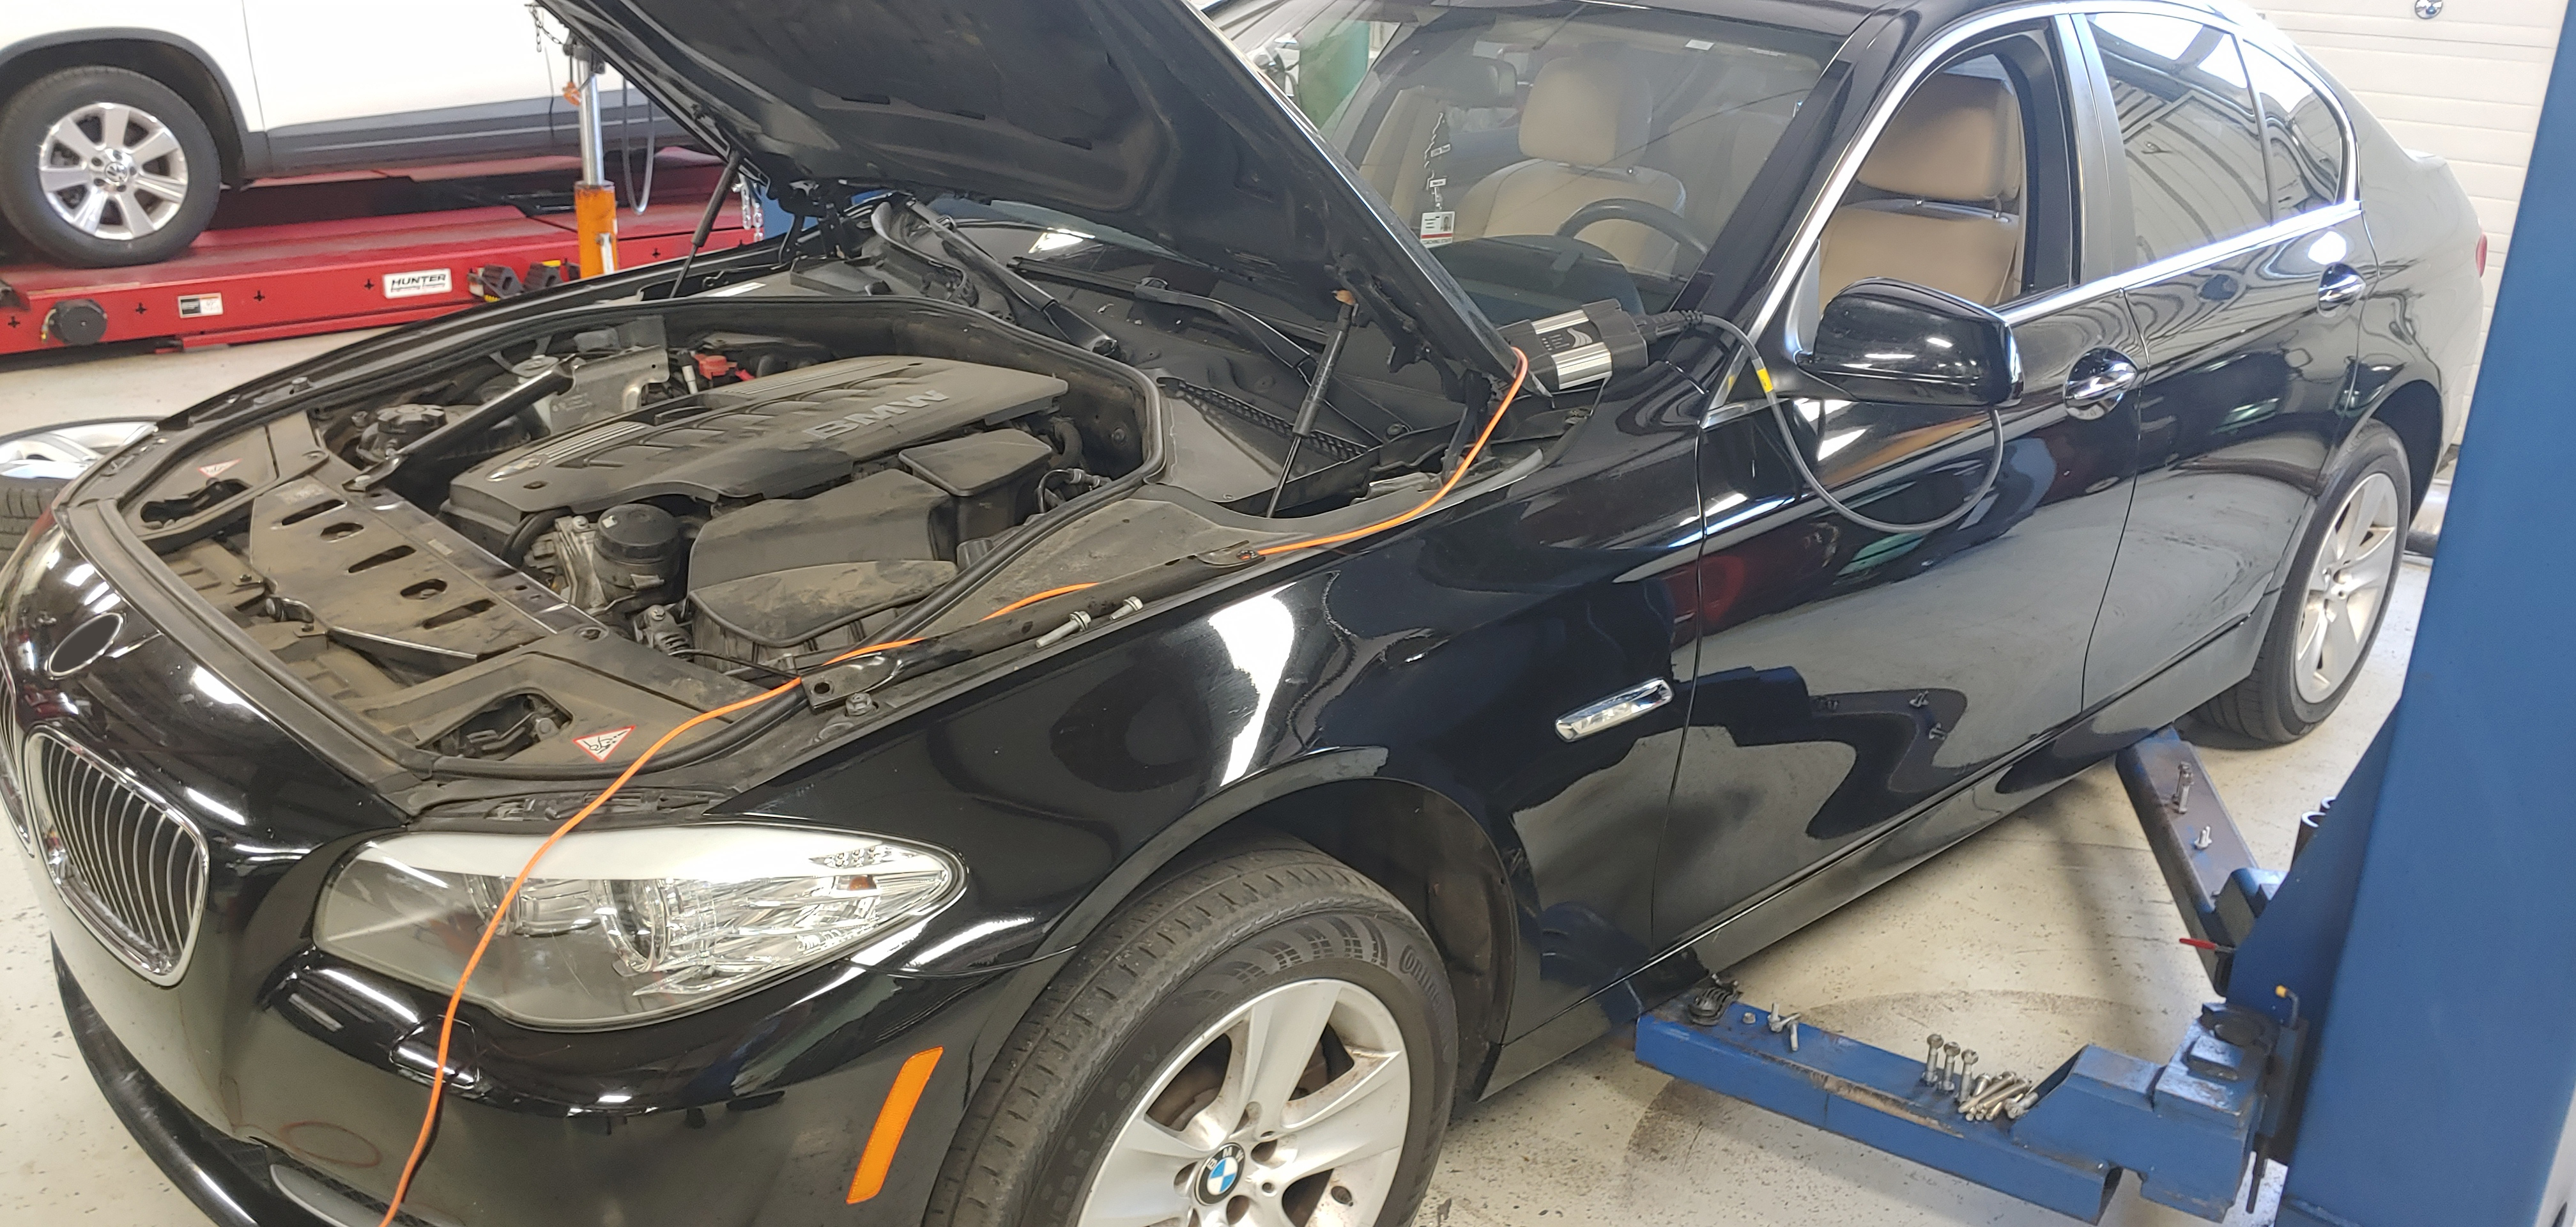 BMW Car In Our Garage for Repair